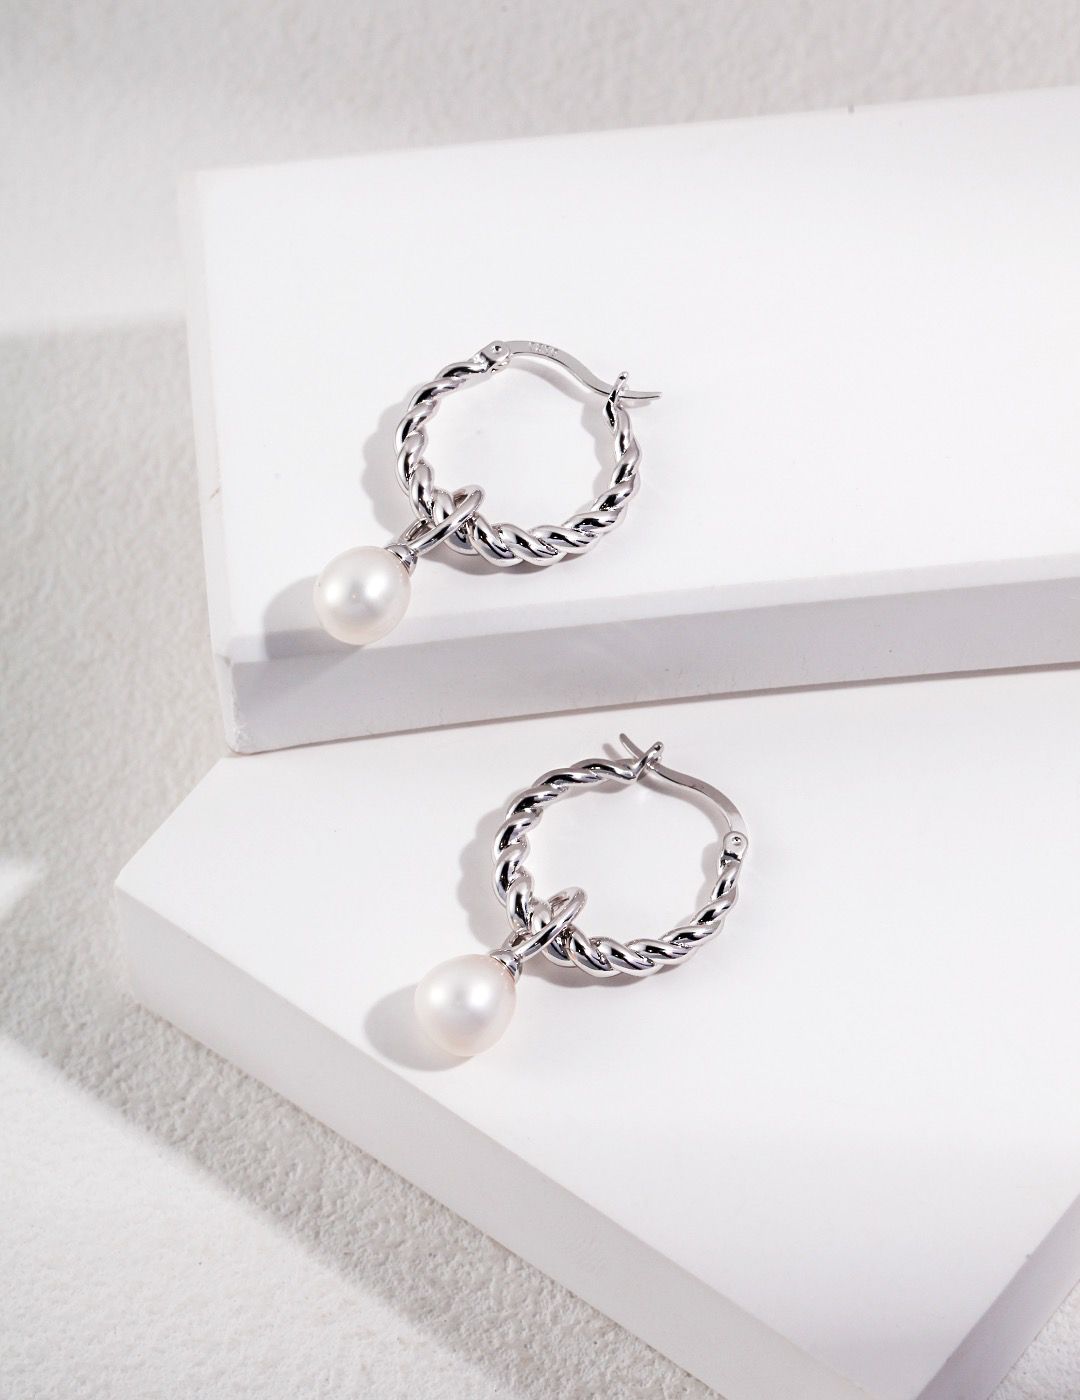 A close-up photo of Pearl Hoop Earrings on a white background.